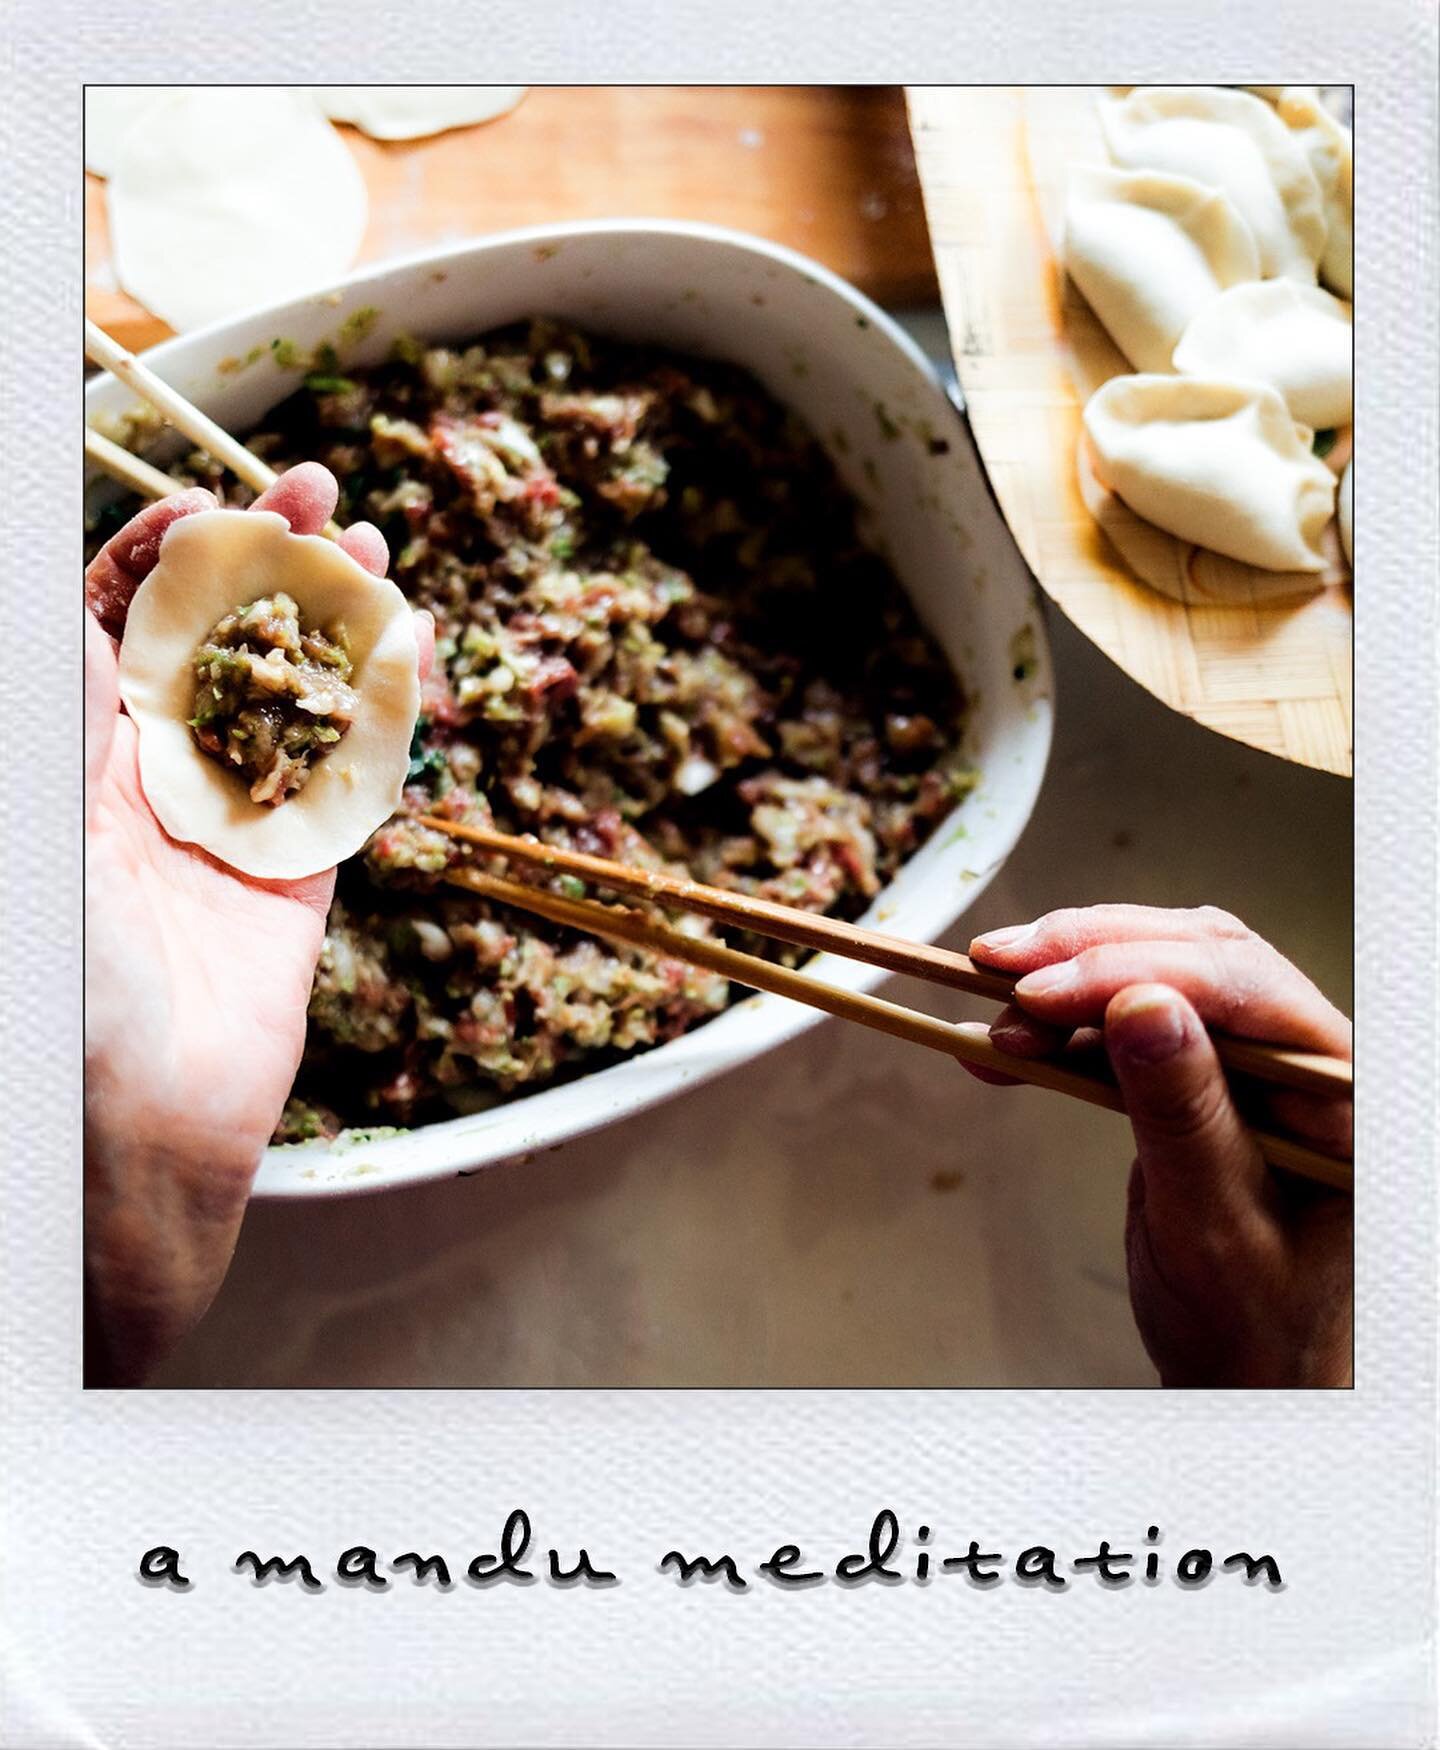 caroline&rsquo;s article about the significance of dumpling culture shares stories from the folding table and features a &lsquo;Homemade&rsquo; episode from @stevenkwlim

now we&rsquo;re in the mood to fold dumplings with our chosen families and lear